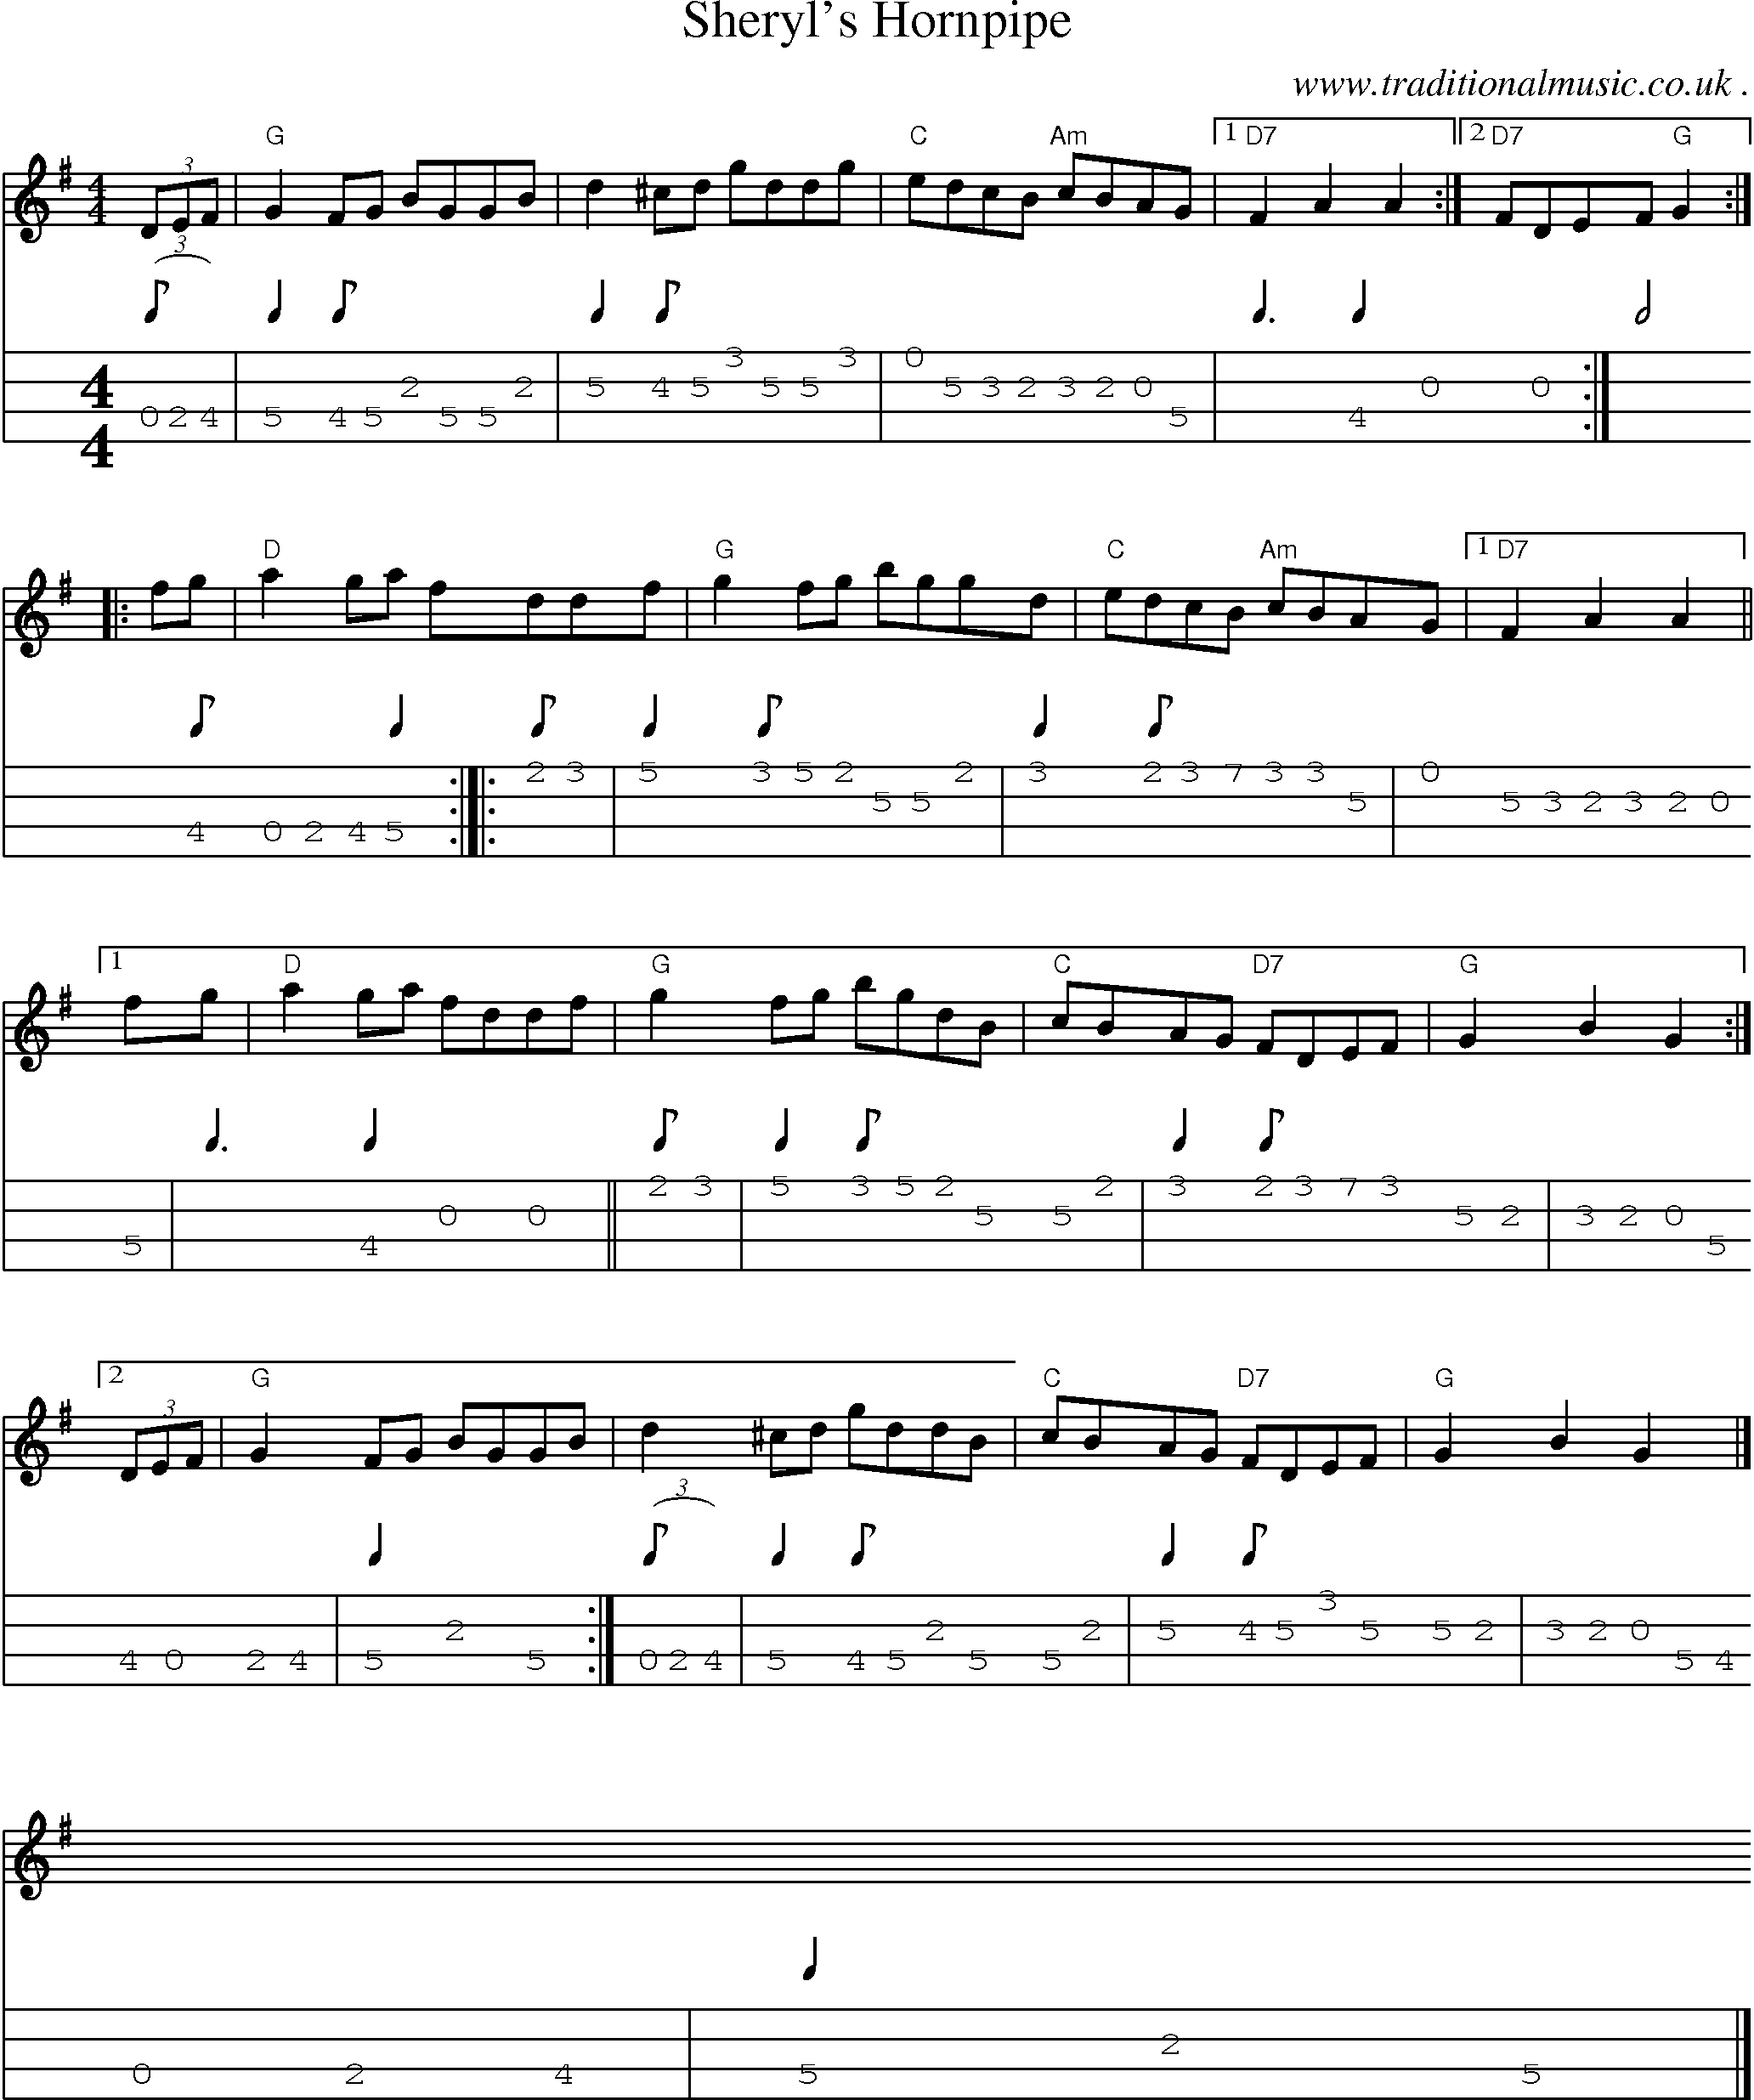 Sheet-music  score, Chords and Mandolin Tabs for Sheryls Hornpipe